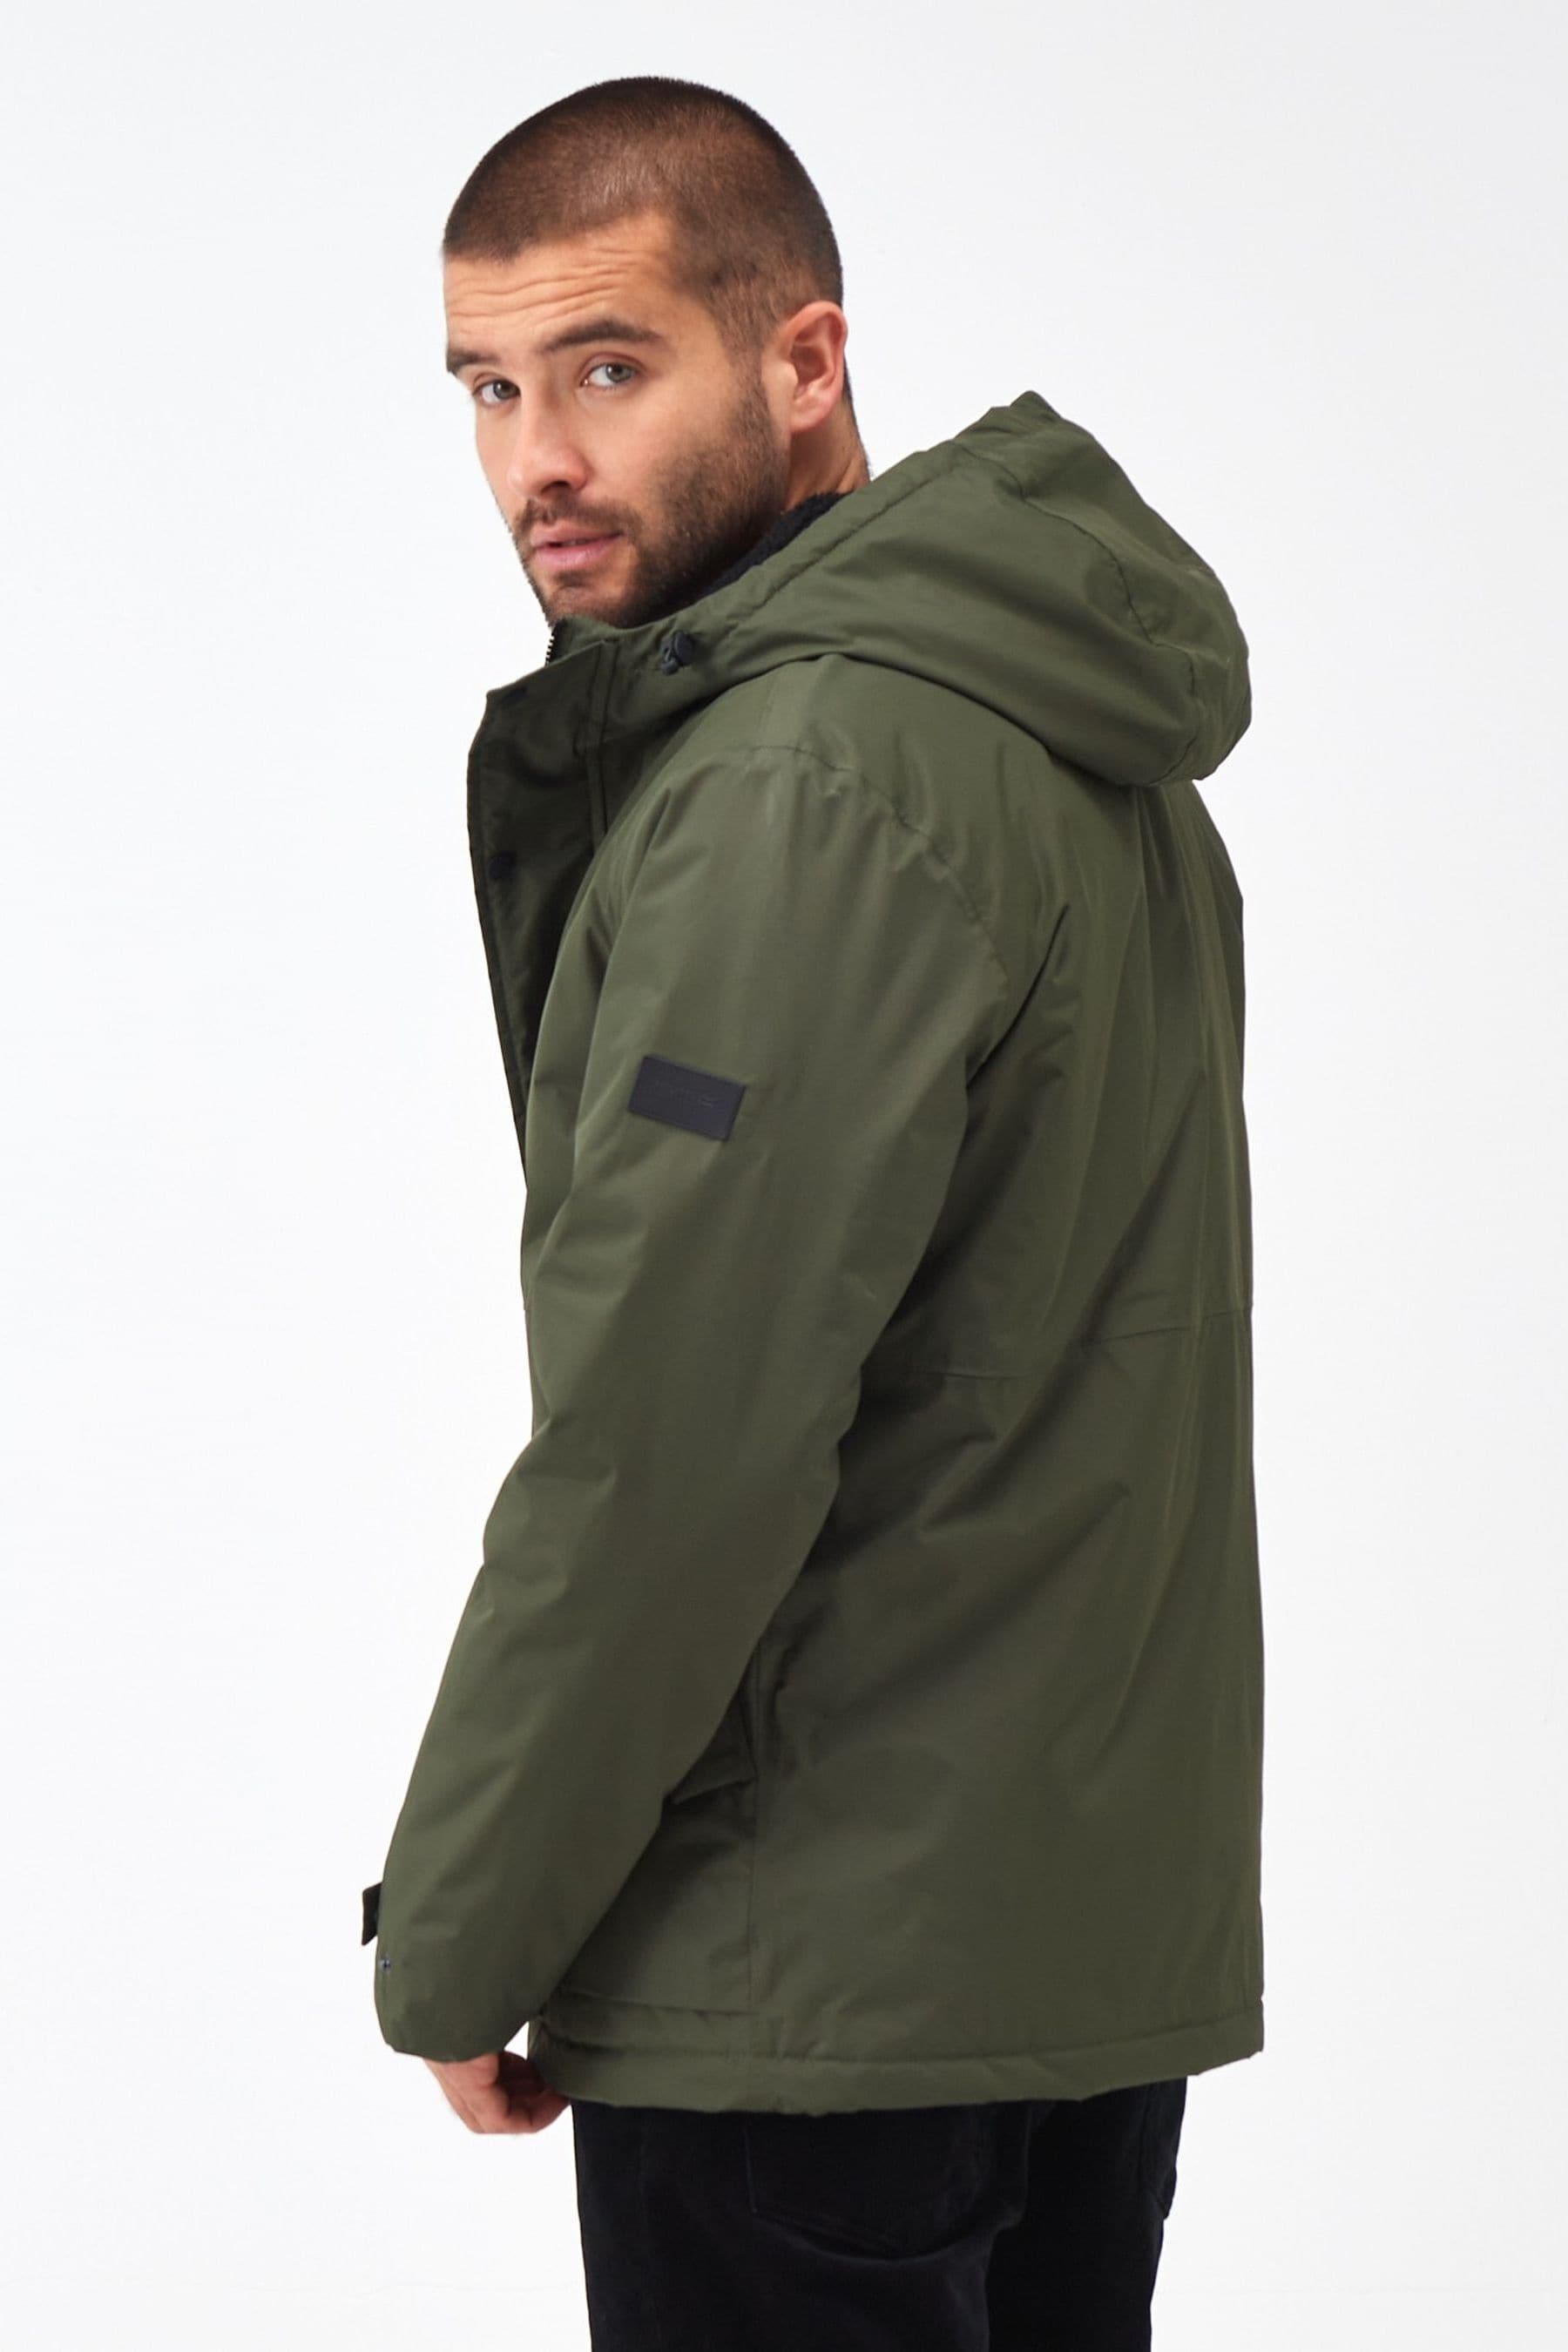 Buy Regatta Green Sterlings IV Waterproof Insulated Jacket from the ...